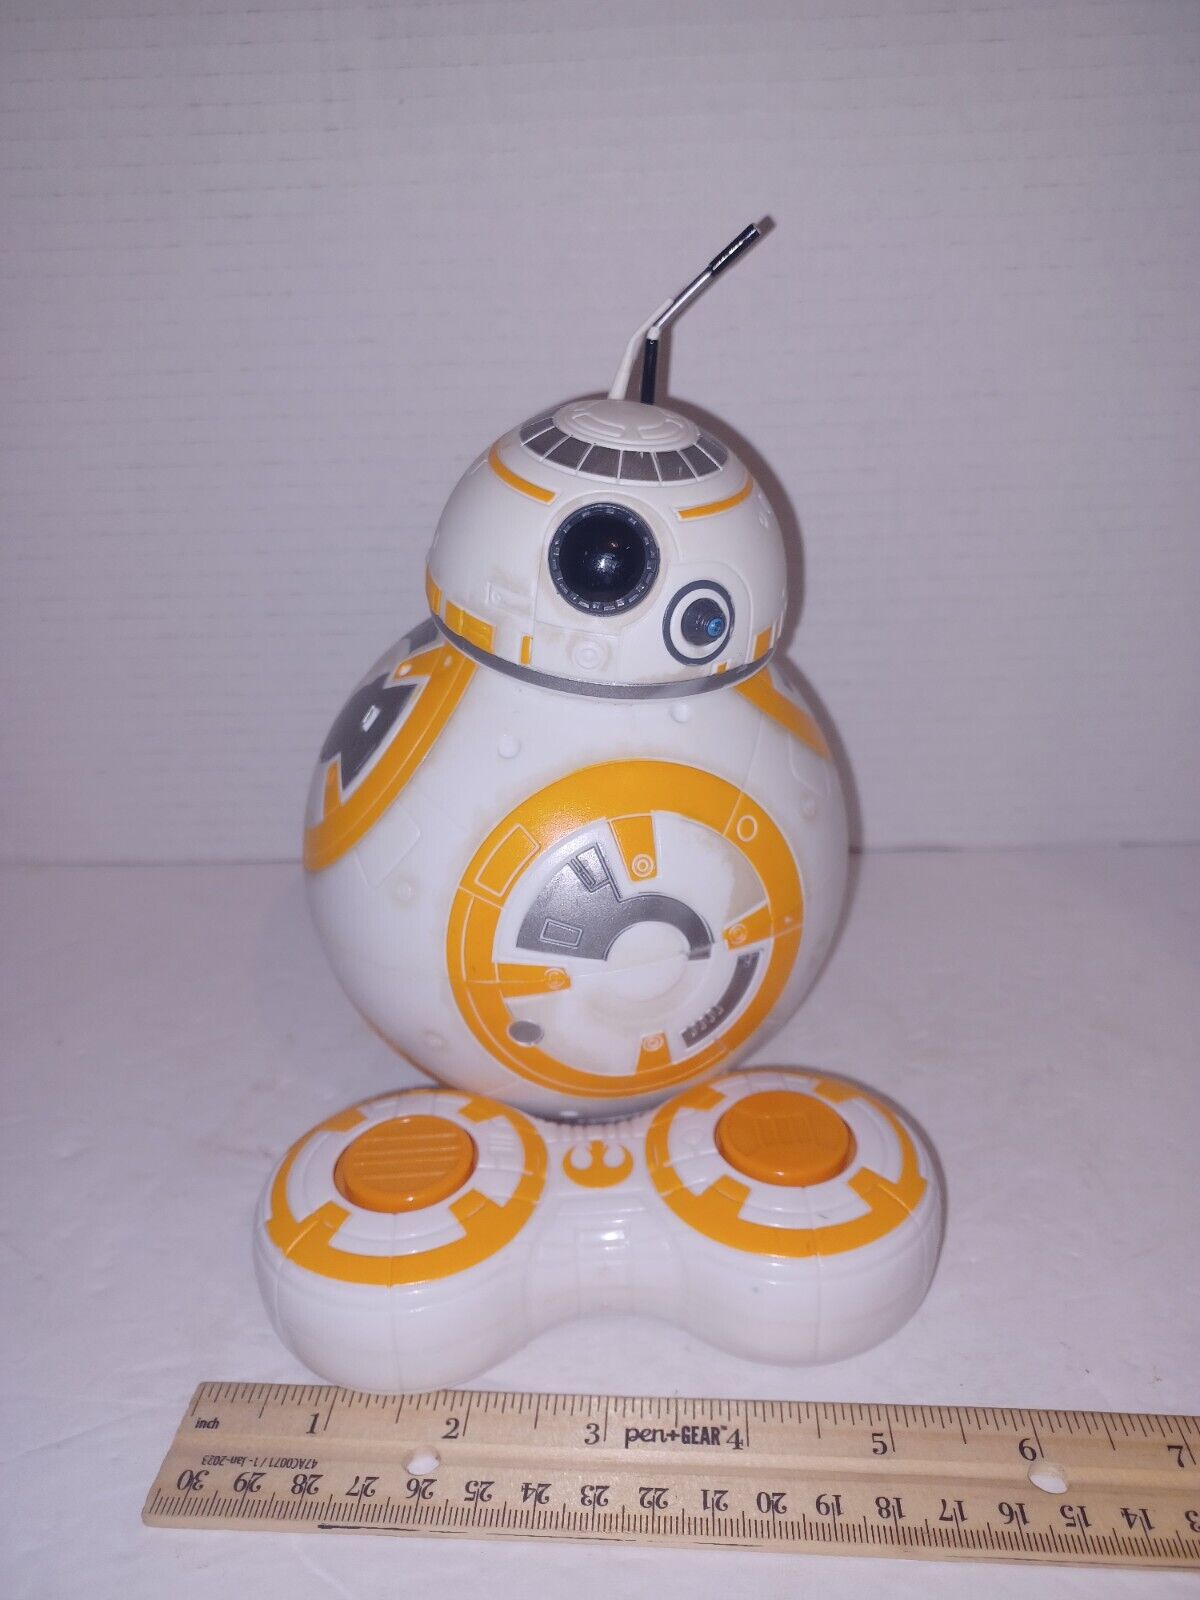 BB-8 Star Wars Remote Control Target Exclusive The Force Awakens RC Droid Tested